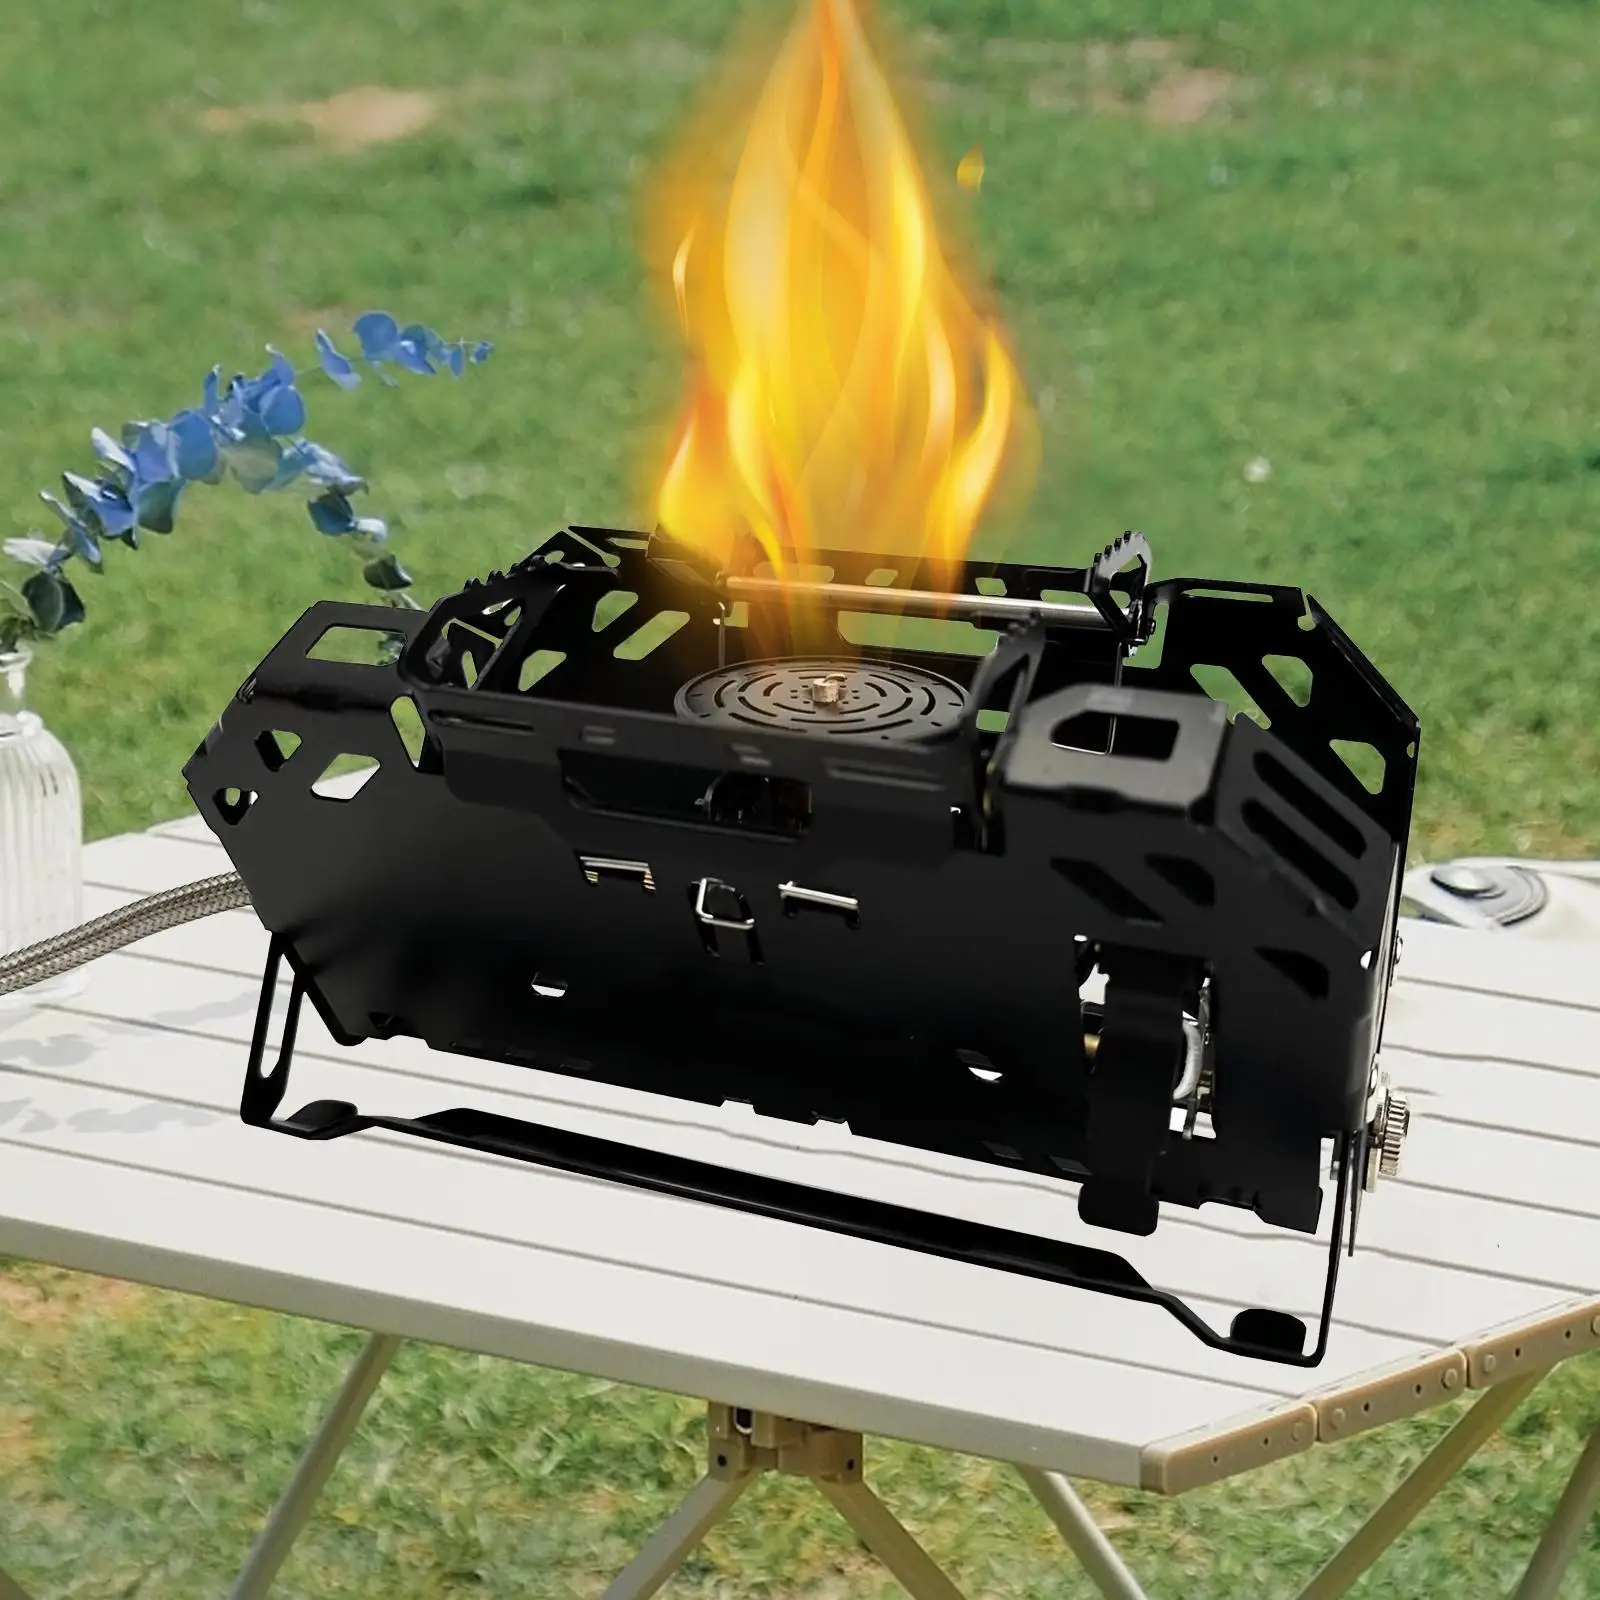 Camping Gas Stoves Camp Cooking Stoves Folding Windproof Gas Burner Furnace for Cooking Picnic Mountaineering Hiking BBQ